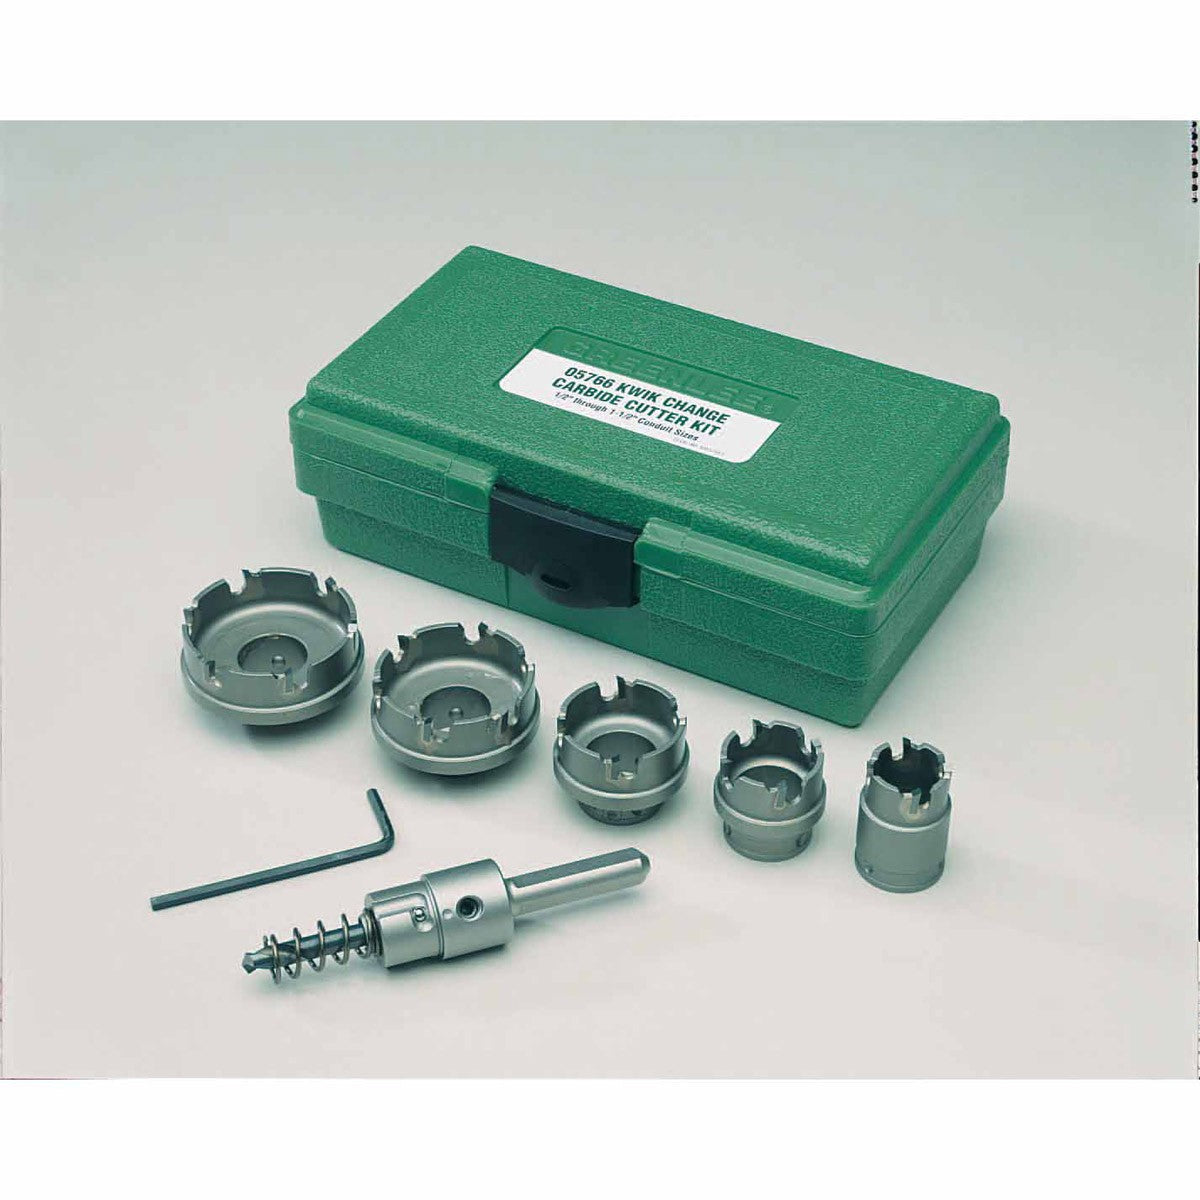 Greenlee 660 Quick Change Stainless Steel Hole Cutter Kit (7/8", 1-1/8", 1-3/8", 1-3/4", 2")